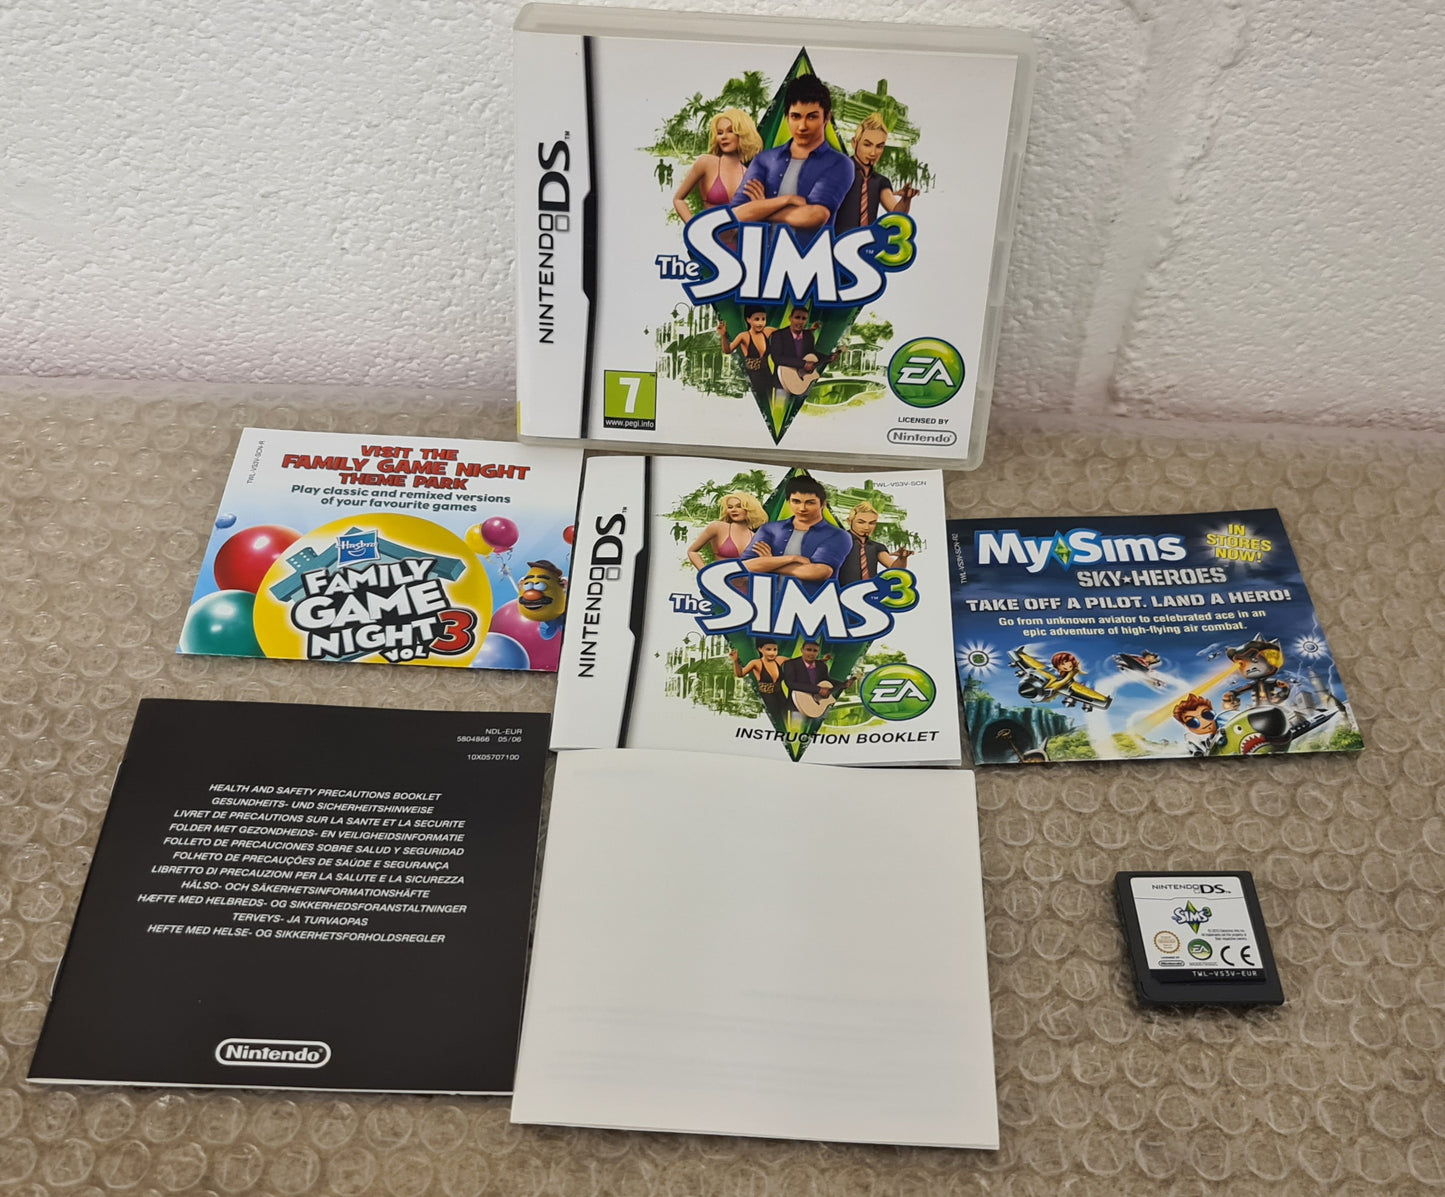 The Sims 3 Nintendo DS Game